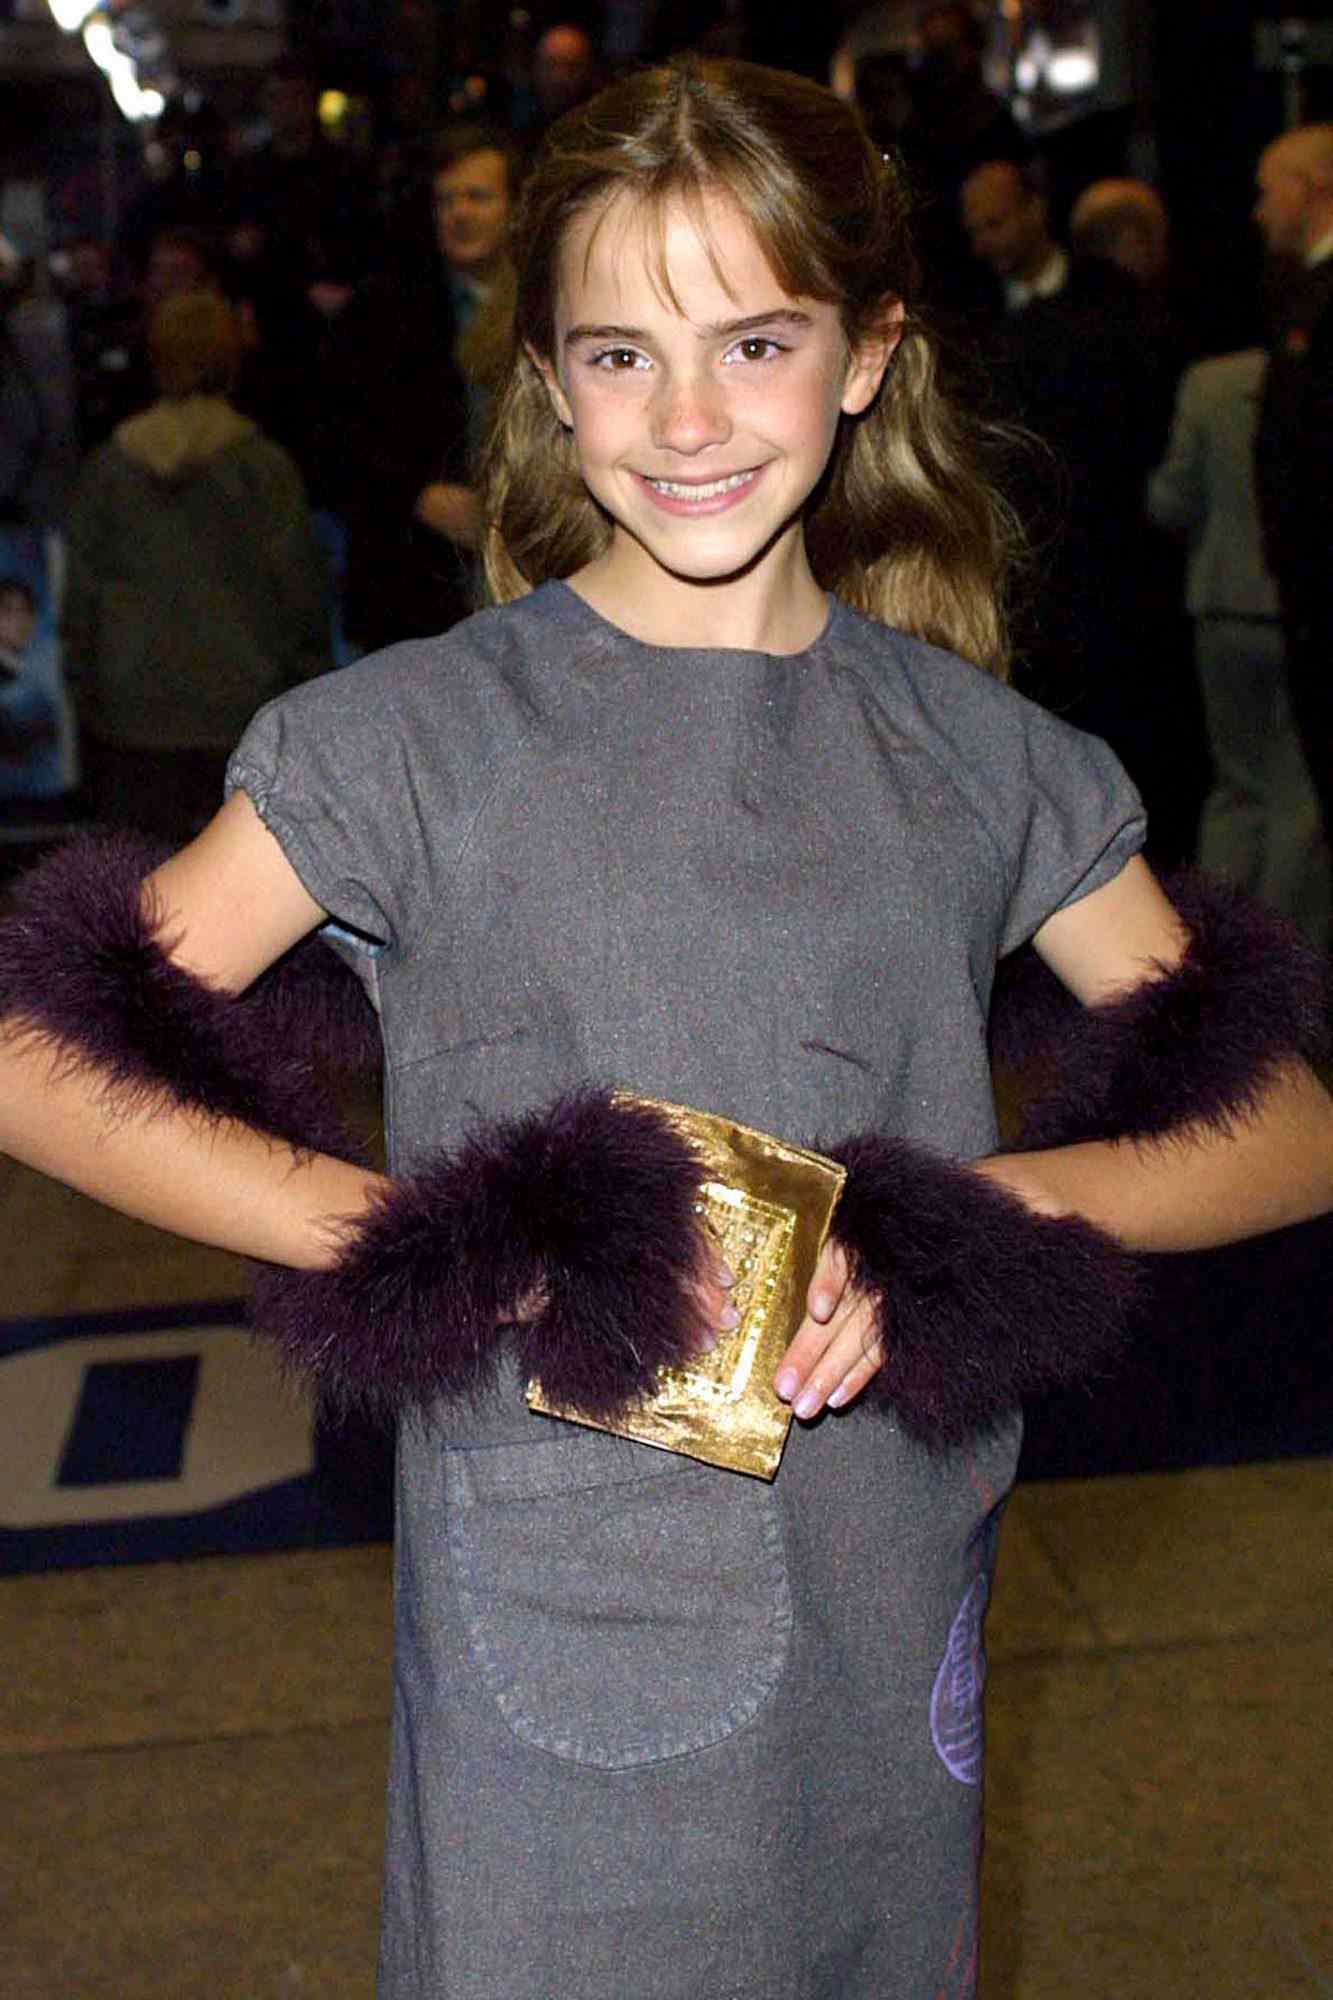 Emma Watson at the Premiere of Harry Potter and the Philosopher's Stone in London on November 4, 2001